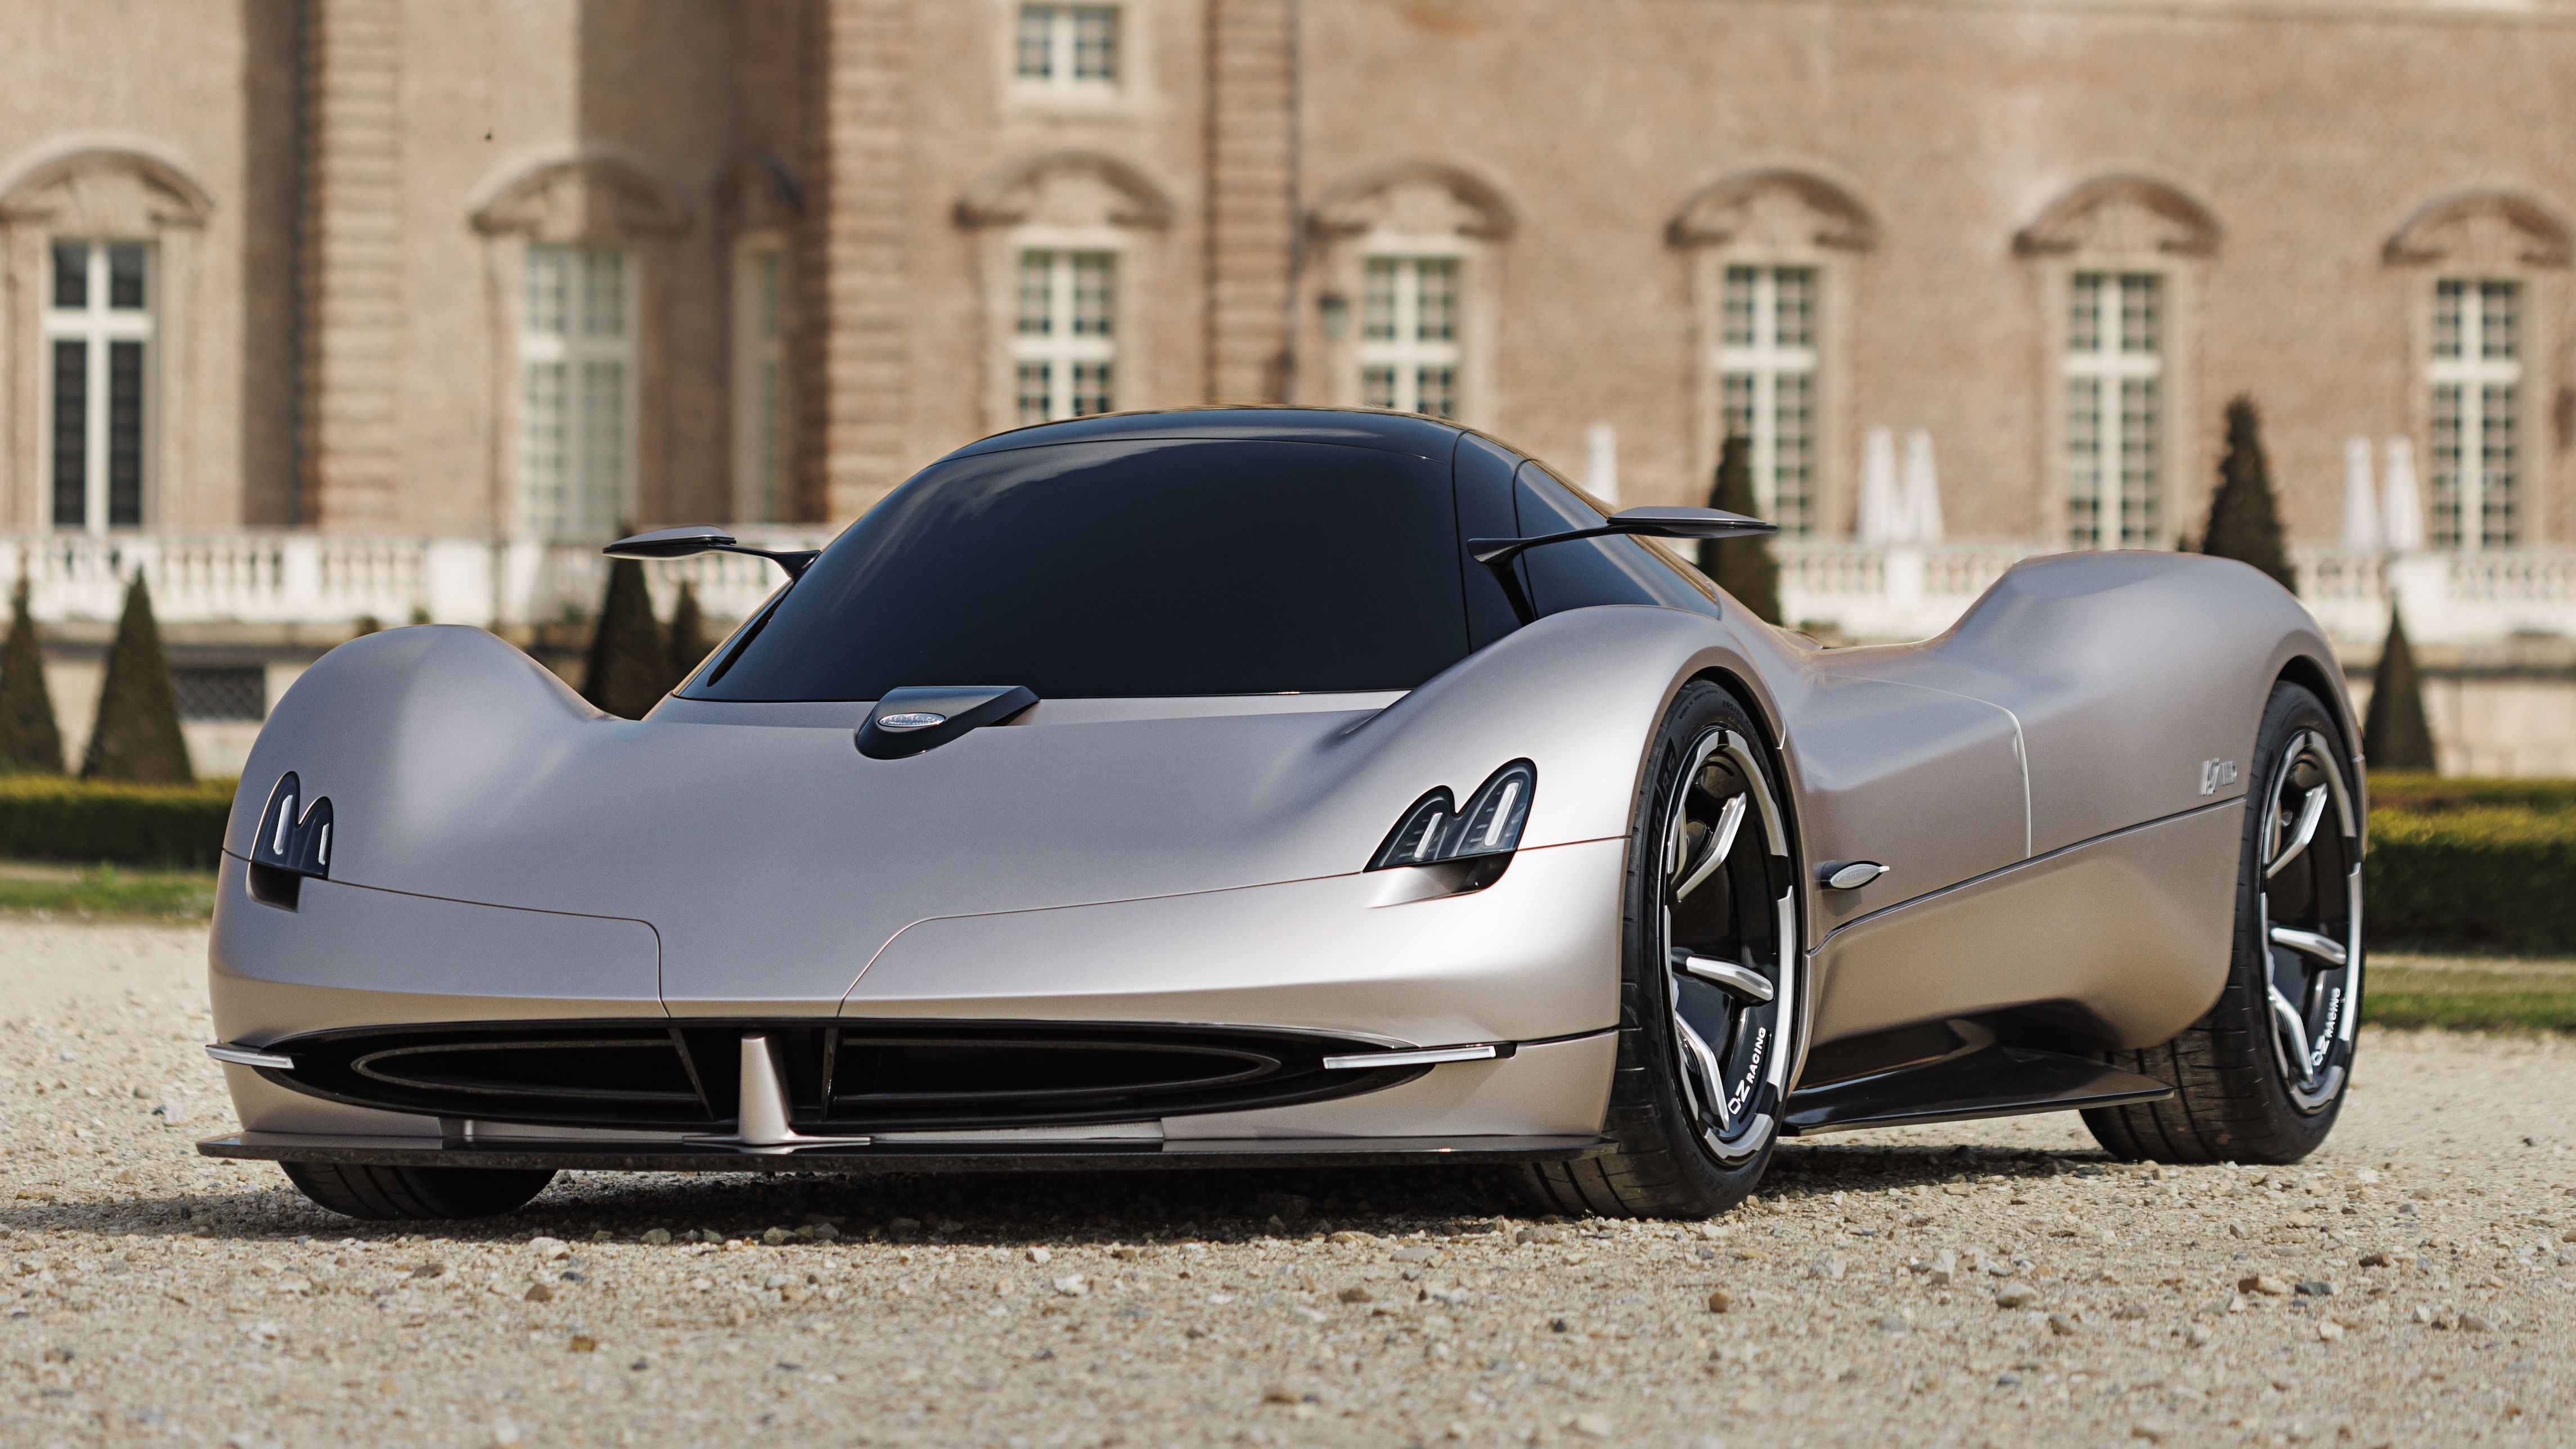 behold: the concept ‘alisea’, a wonderfully reimagined pagani zonda